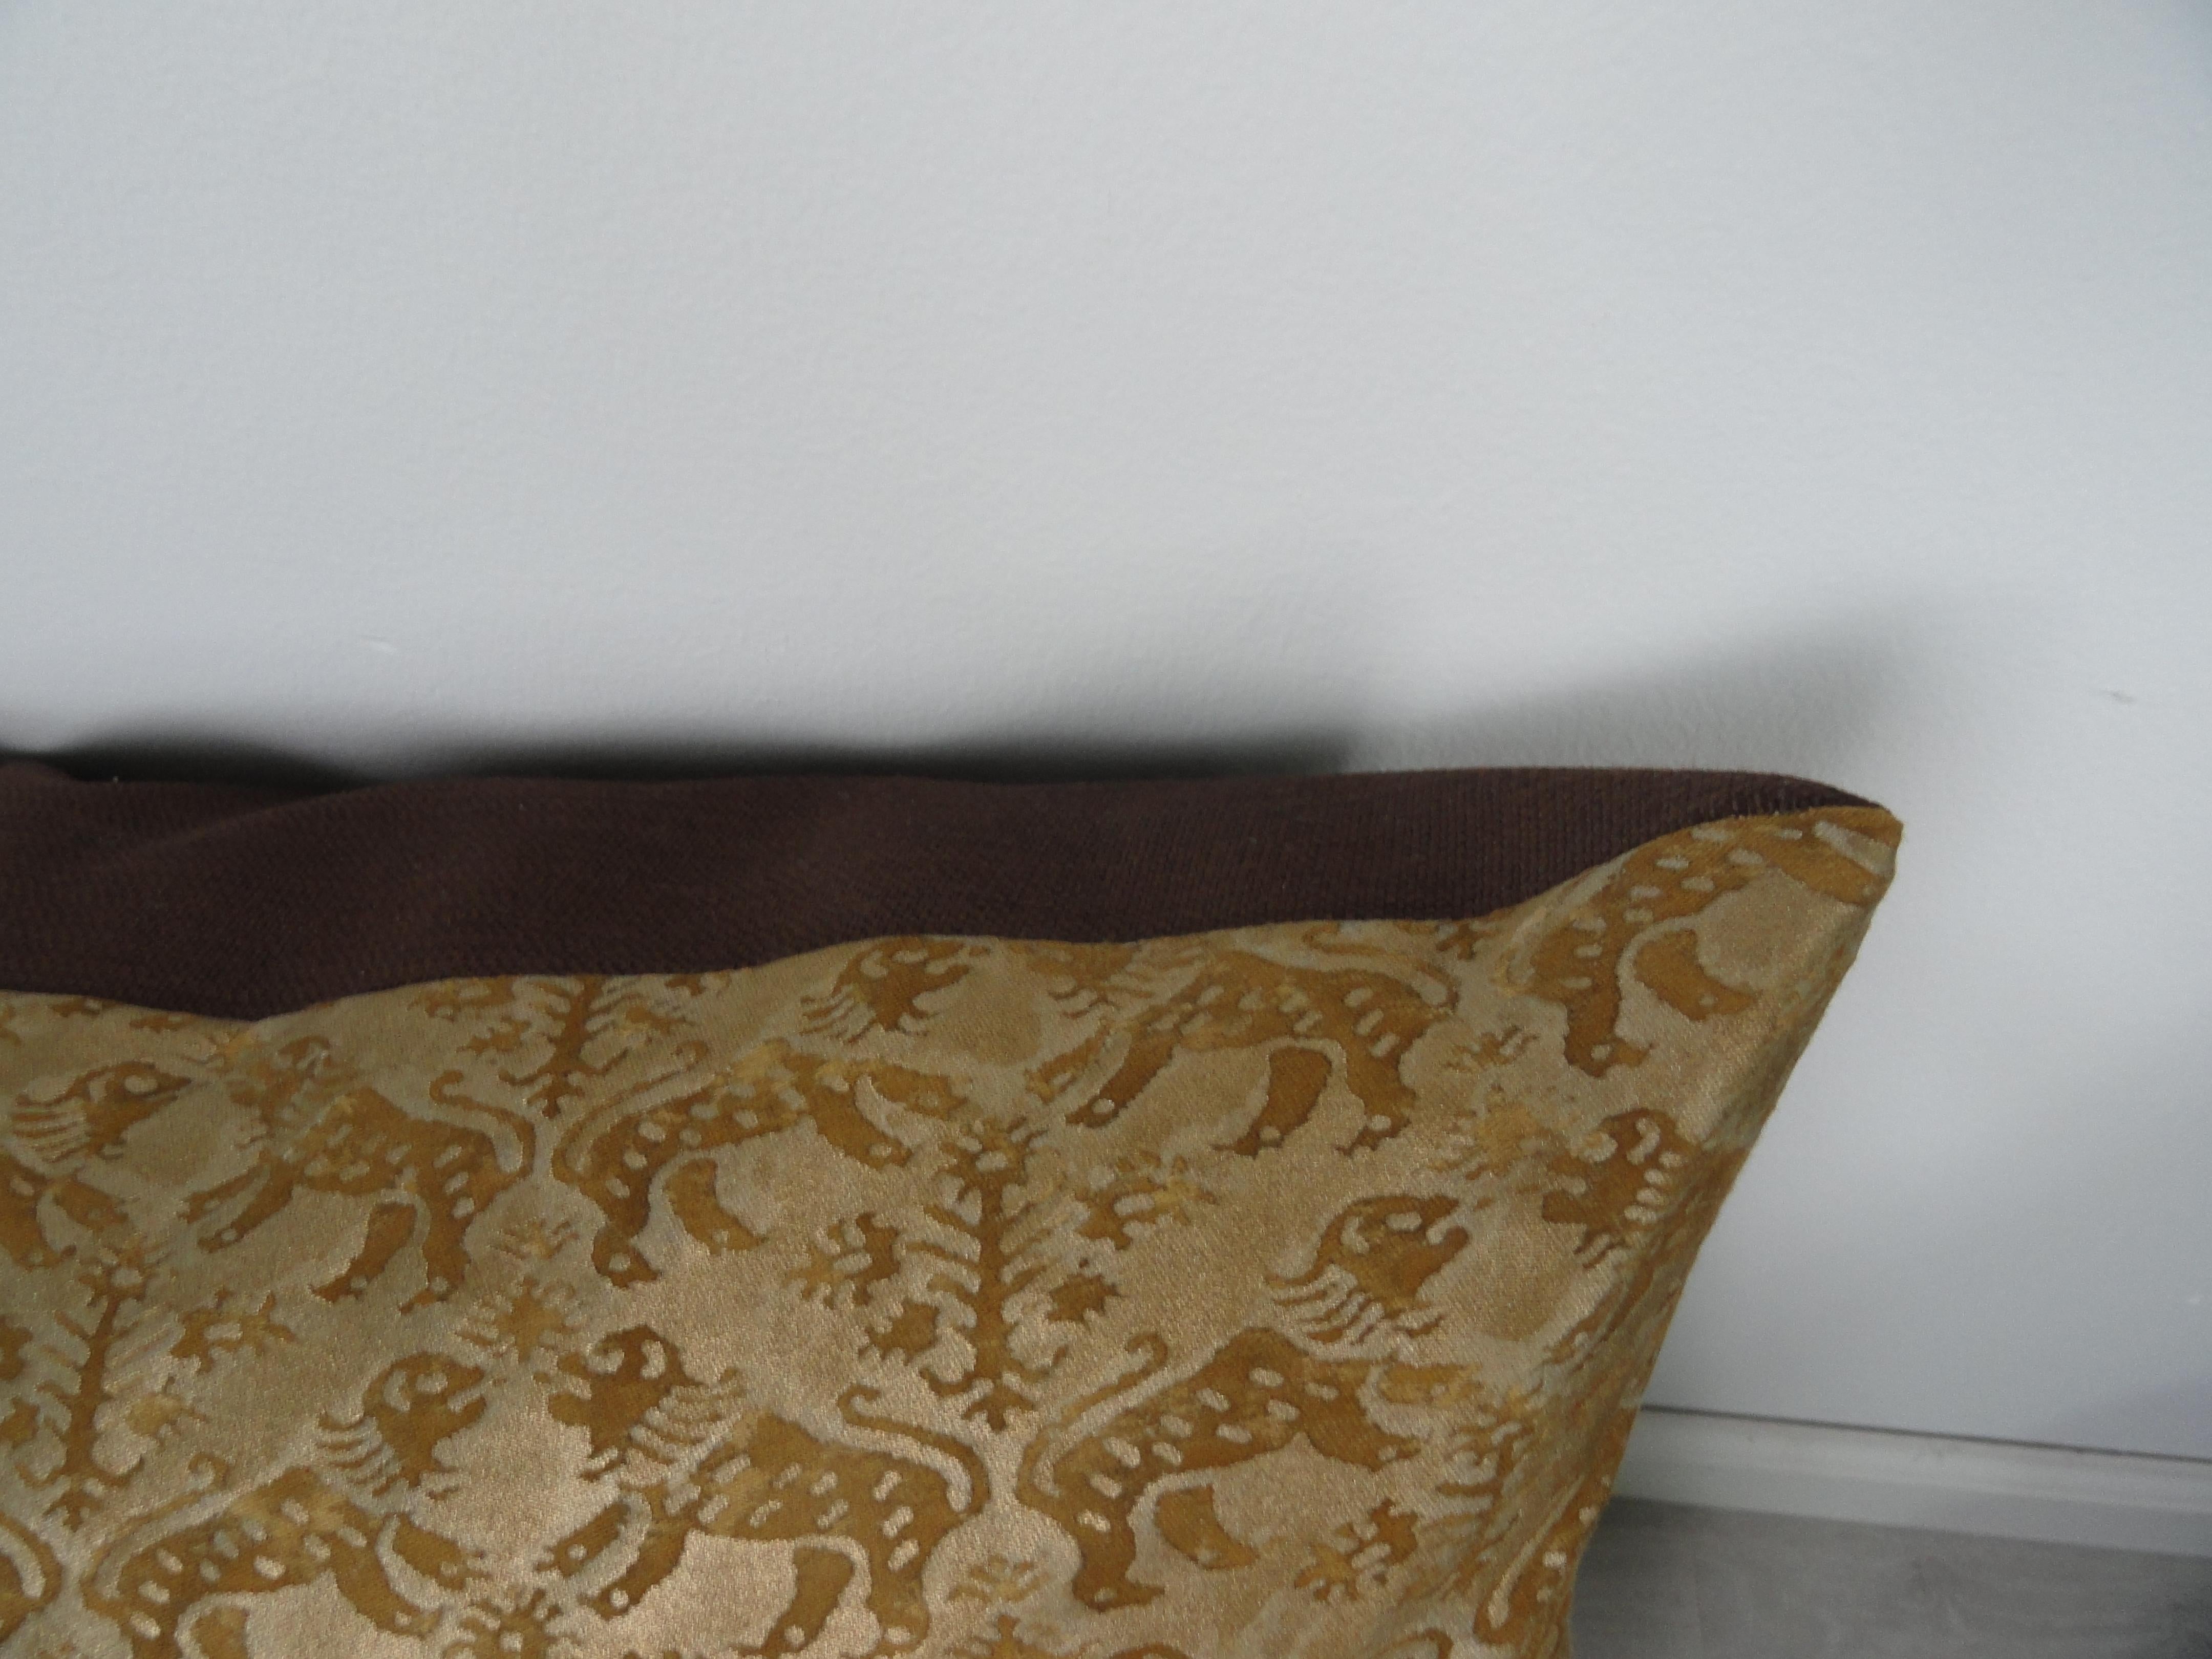 Pair of fortuny pillows. Down filled. Back is a brown cotton. Measures: 24